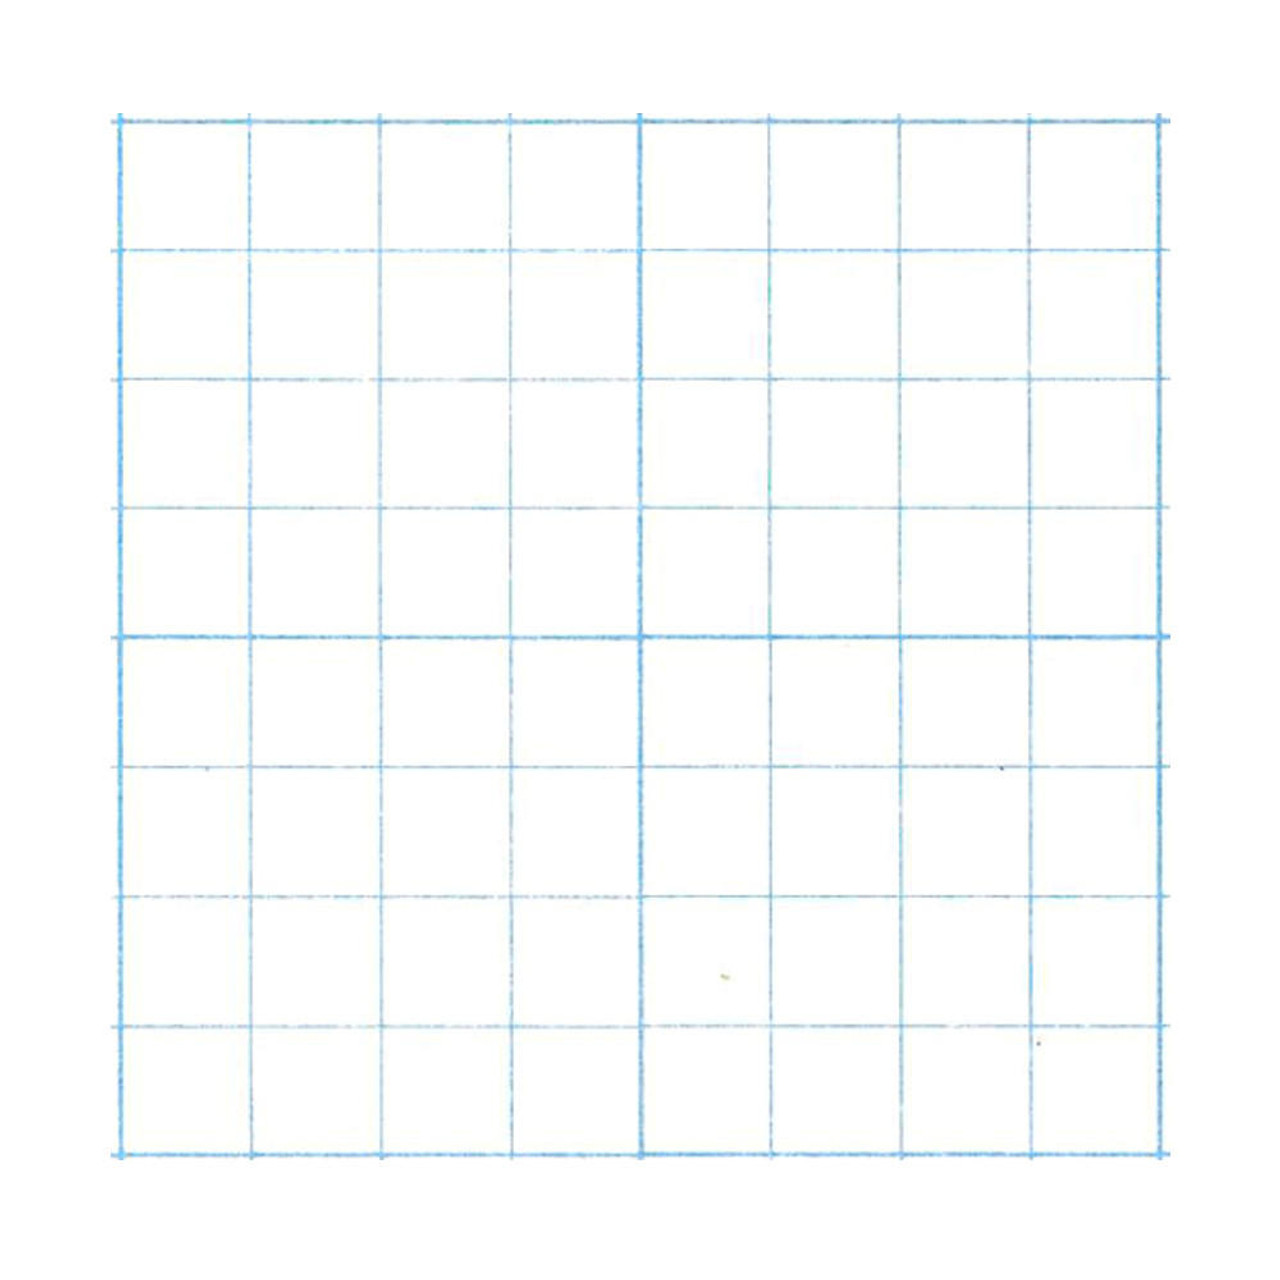 GRAPH PAPER NOTEBOOK 1 INCH SQUARES: Blank Graphing Paper (100 Pages, Thick  Solid Lines, Large, 8.5 x 11) Grid Paper Notebook.